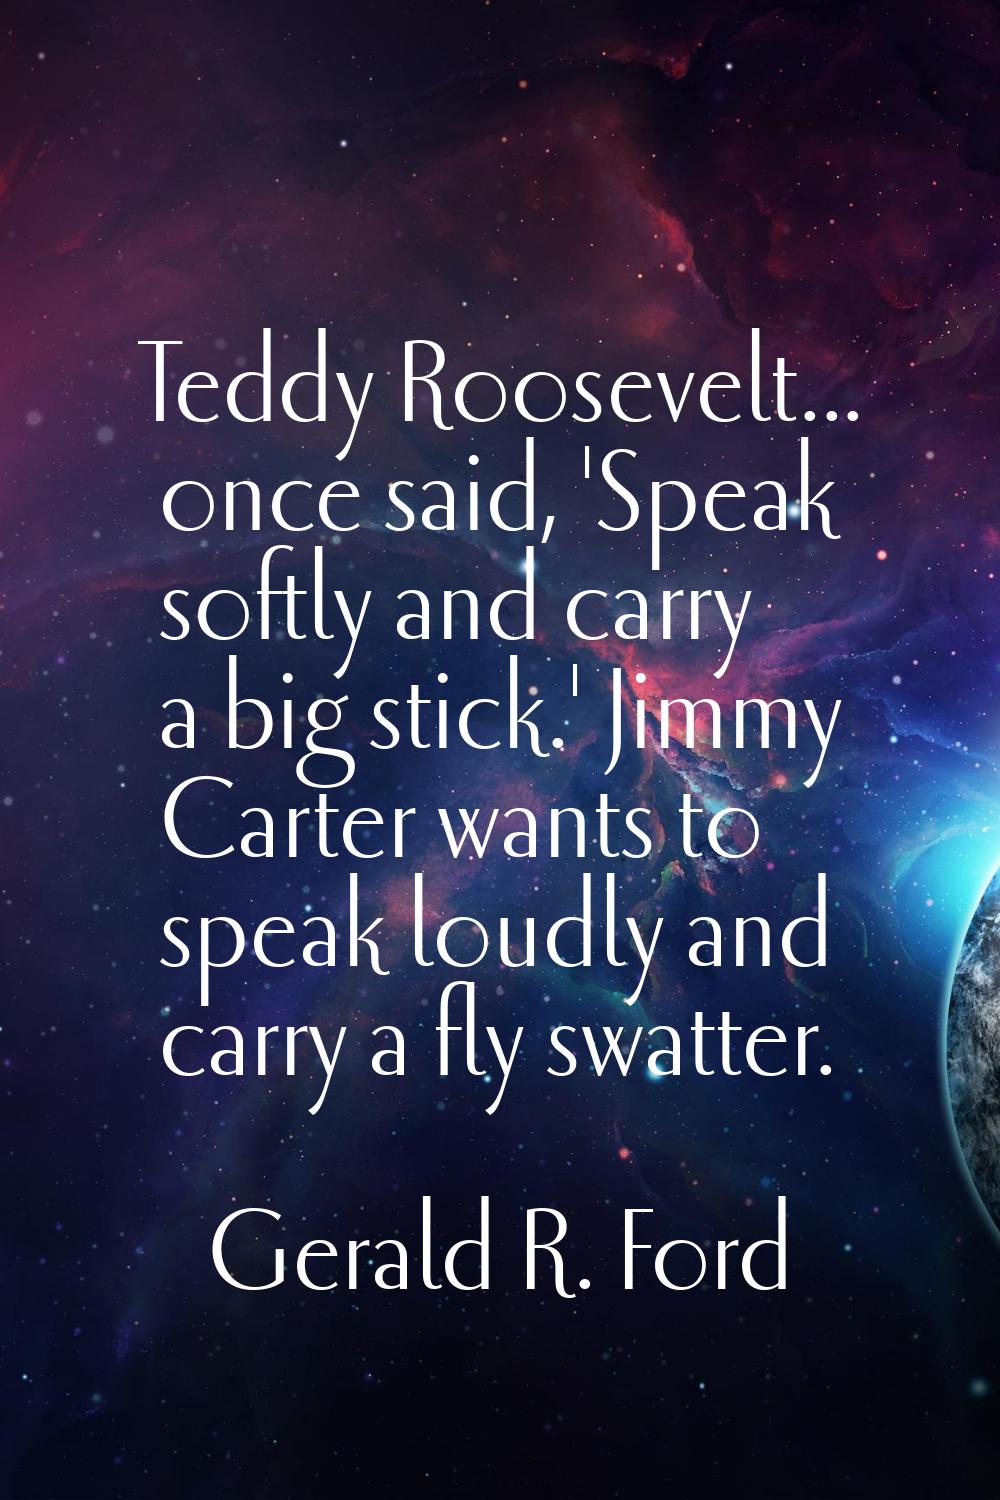 Teddy Roosevelt... once said, 'Speak softly and carry a big stick.' Jimmy Carter wants to speak lou